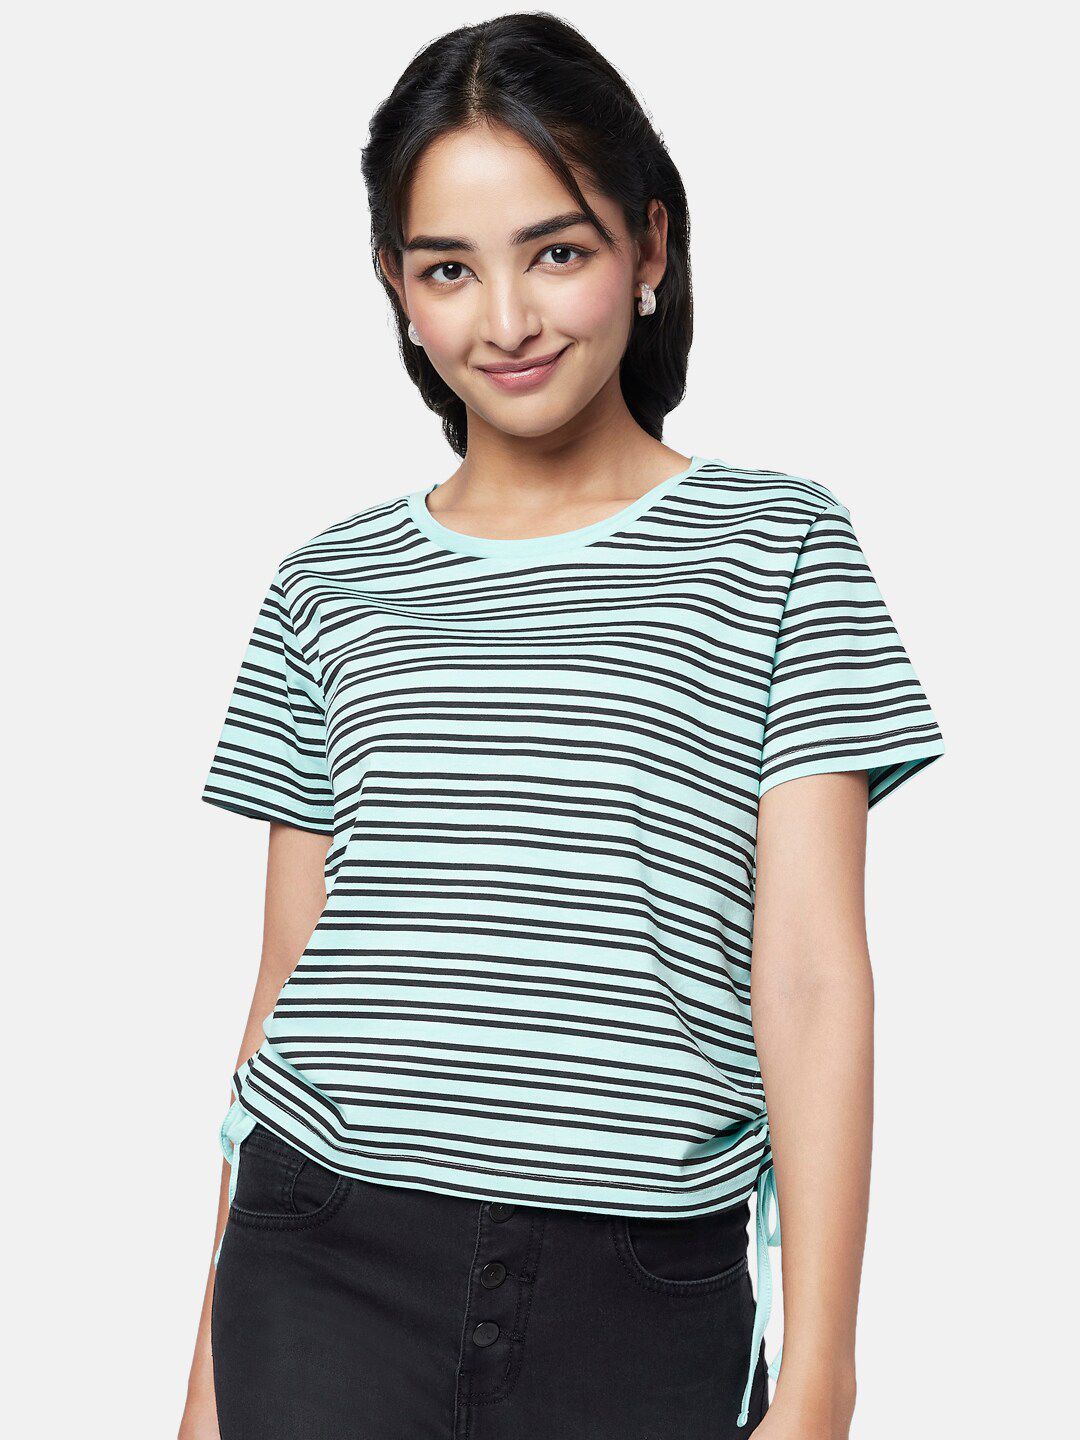 YU by Pantaloons Striped Round Neck Cotton Crop Top Price in India